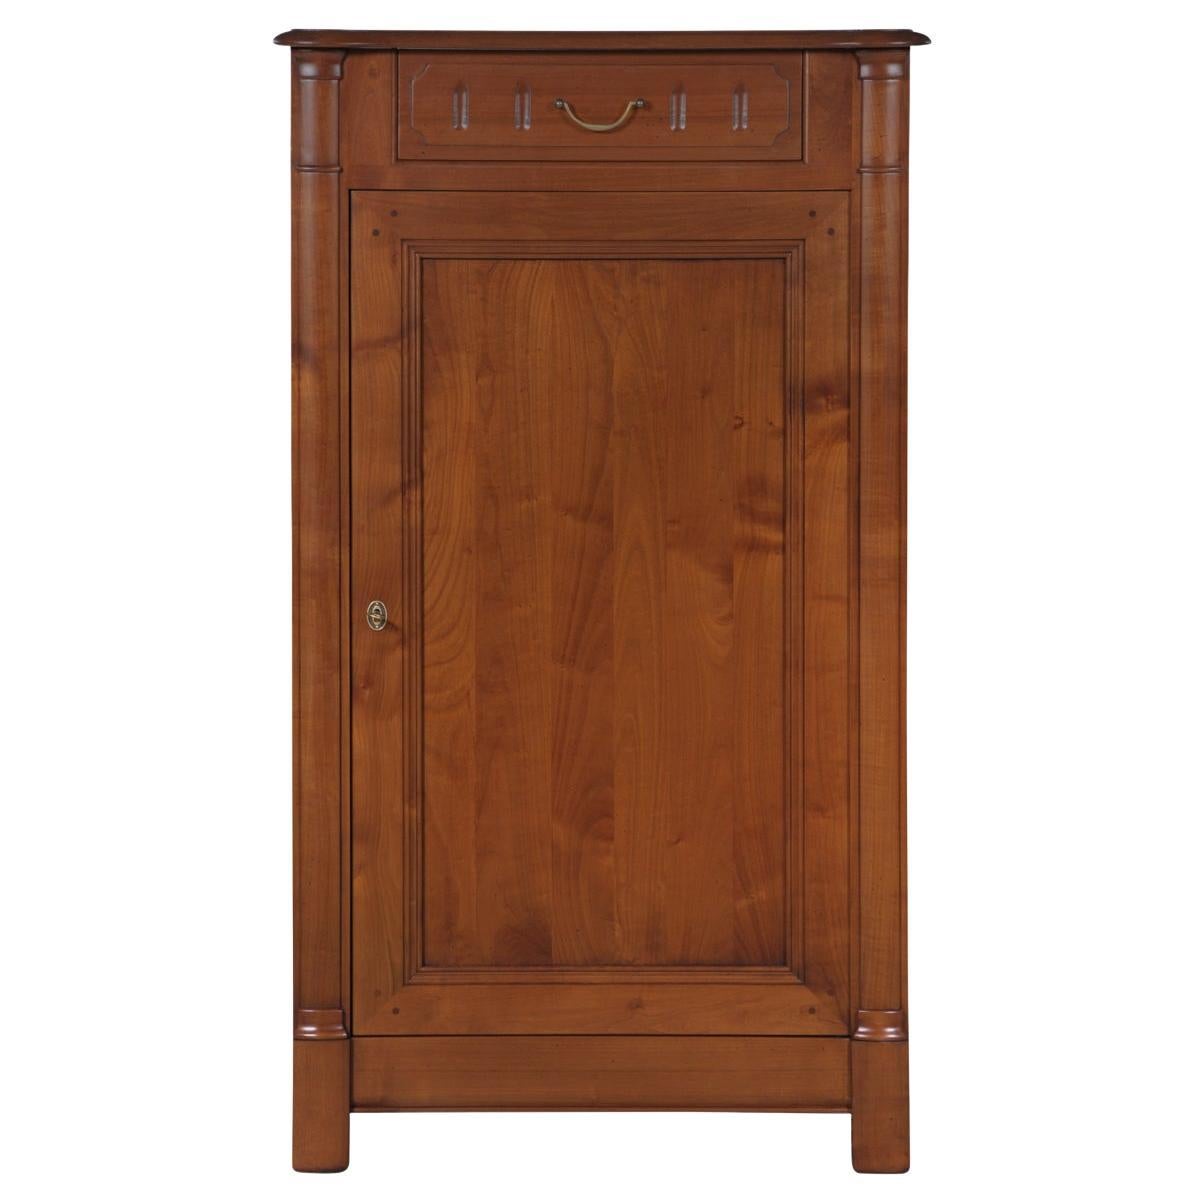 Bonnetiere Cabinet in solid cherry wood, TRADITION French country style